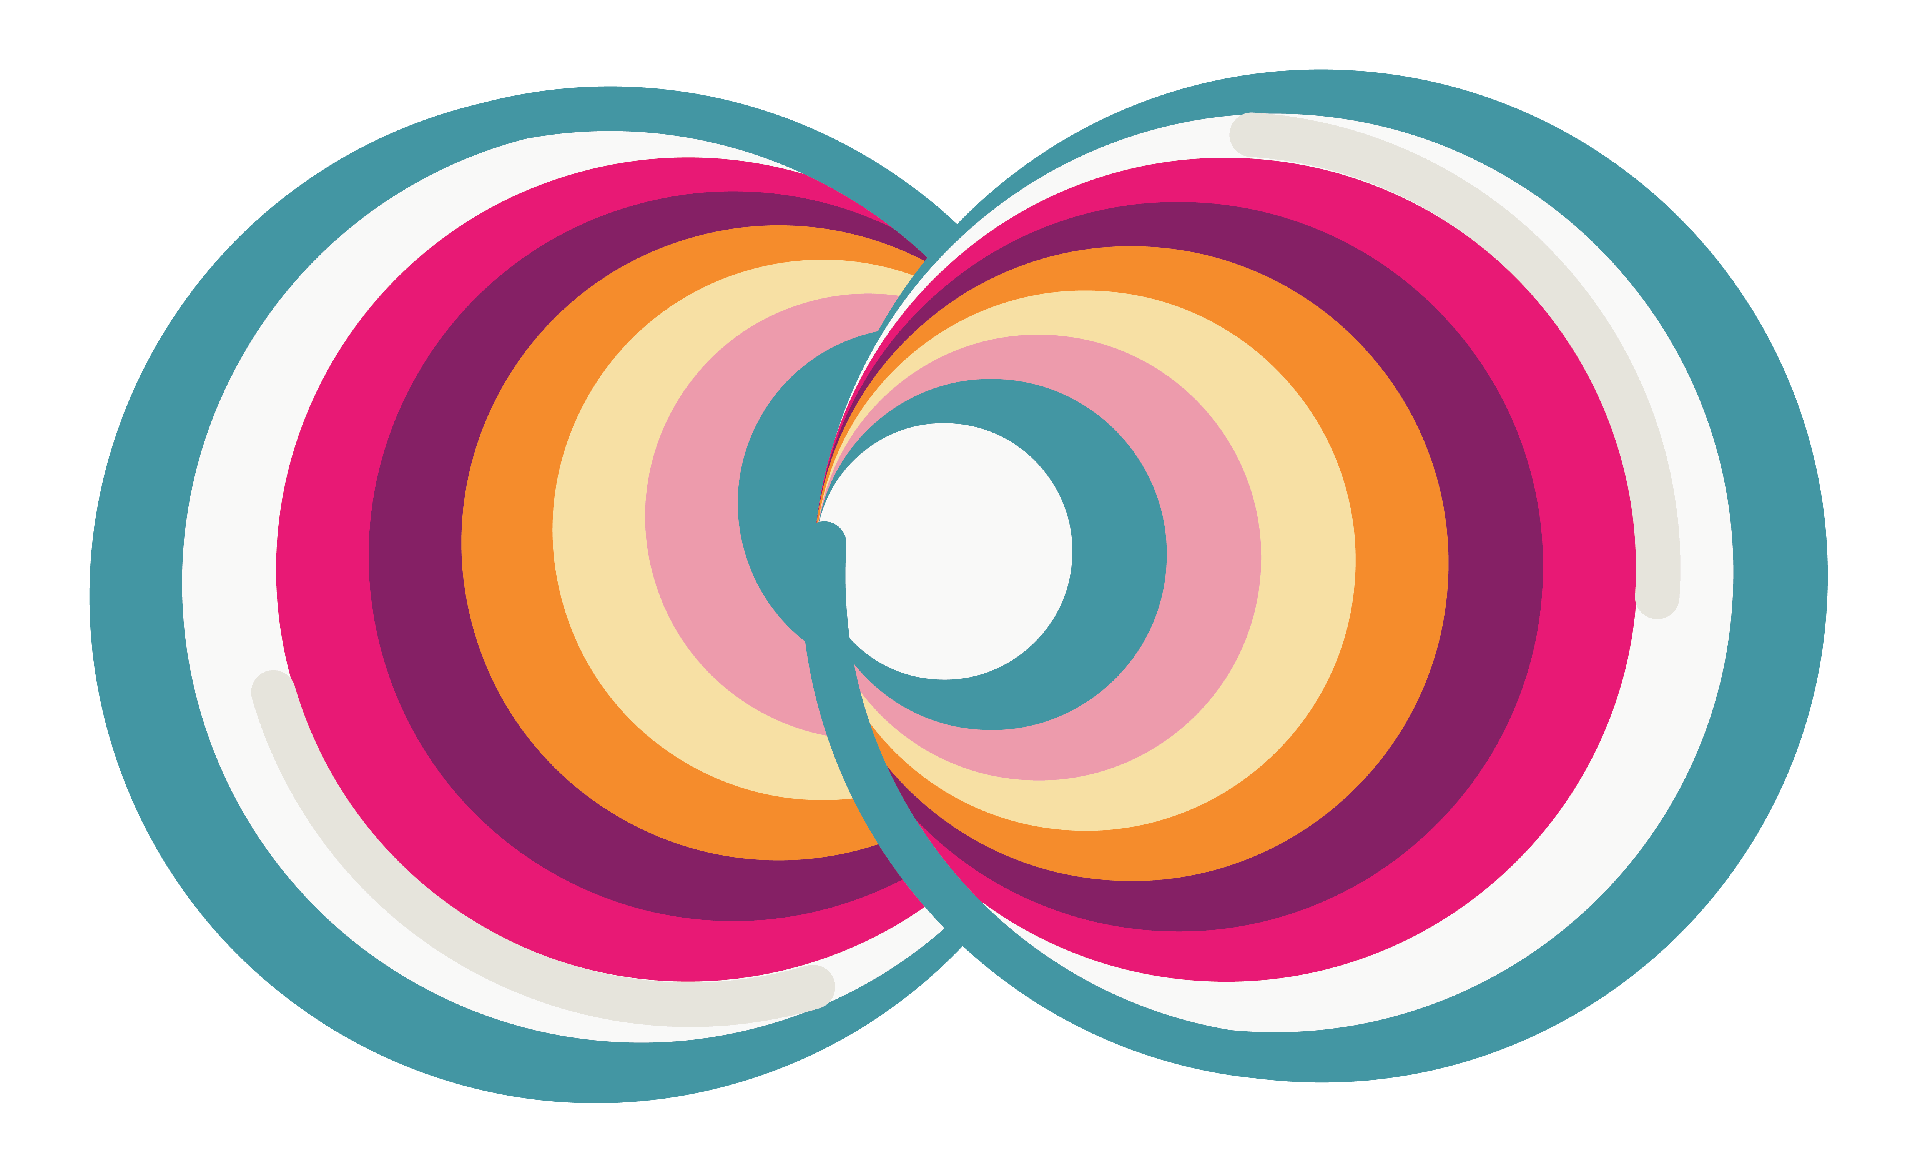 Decorative image of two concentric multi-colored spheres overlapping